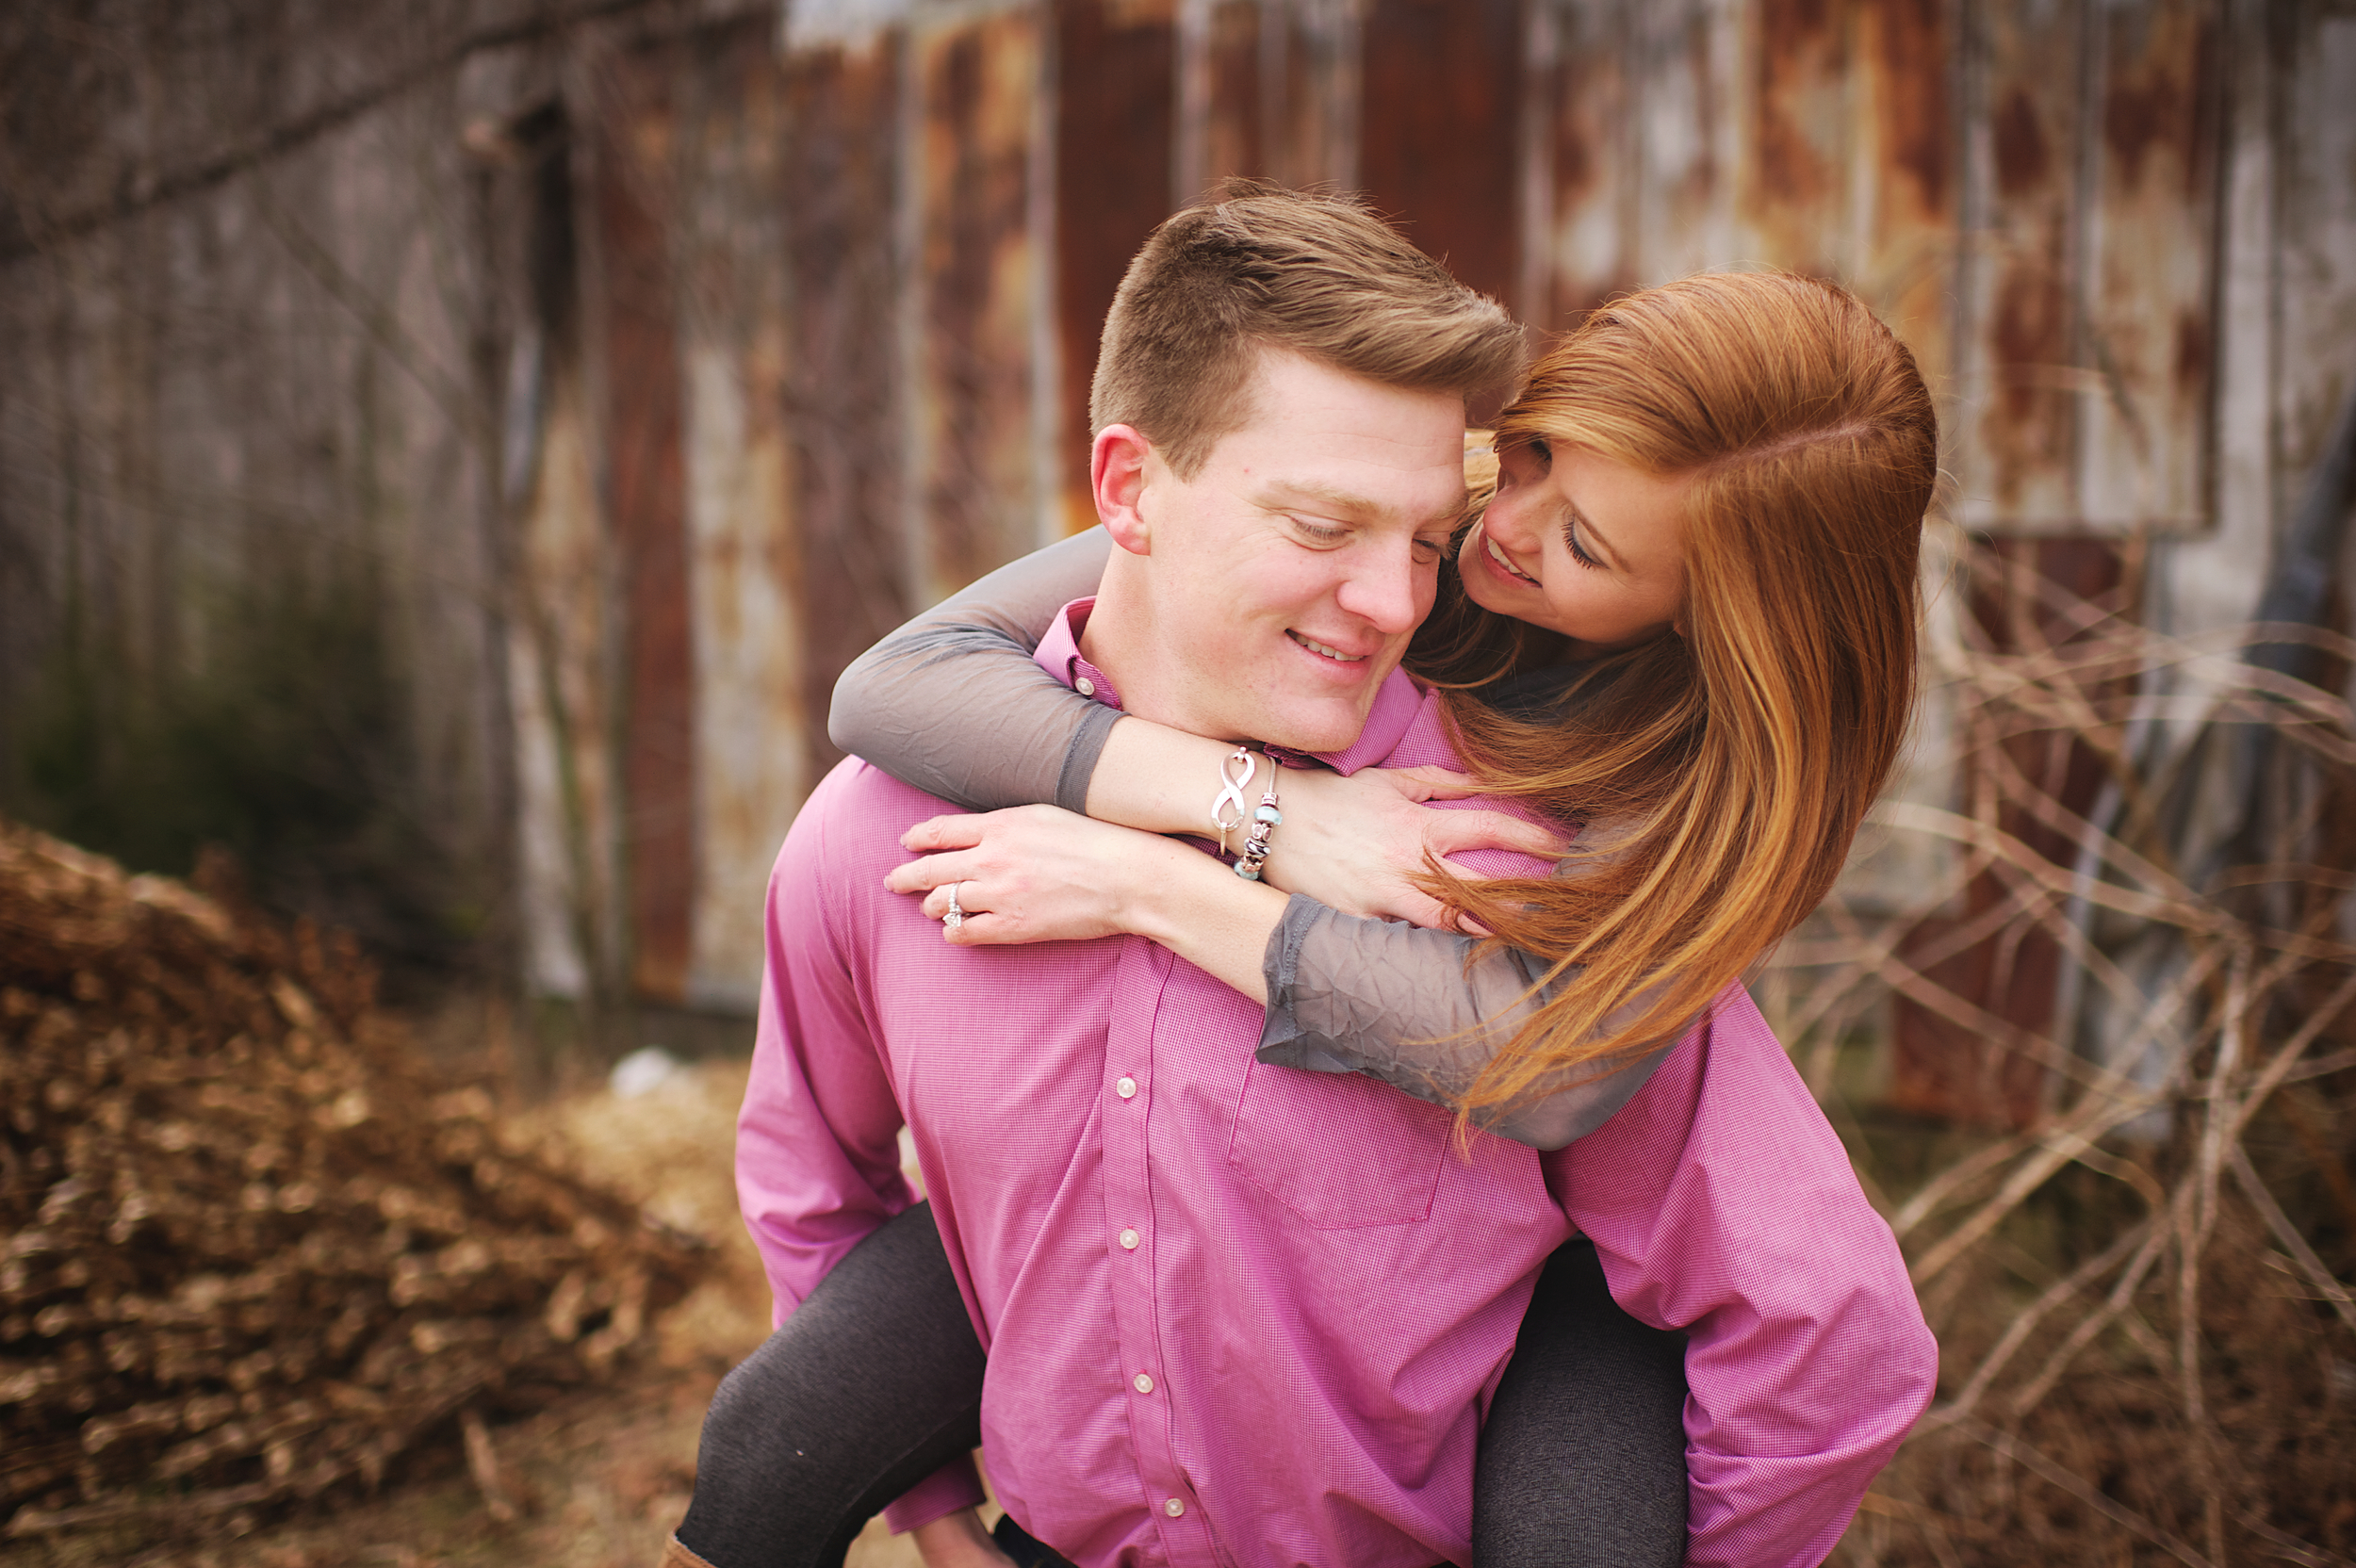 corley_engagement_faves 7744.jpg